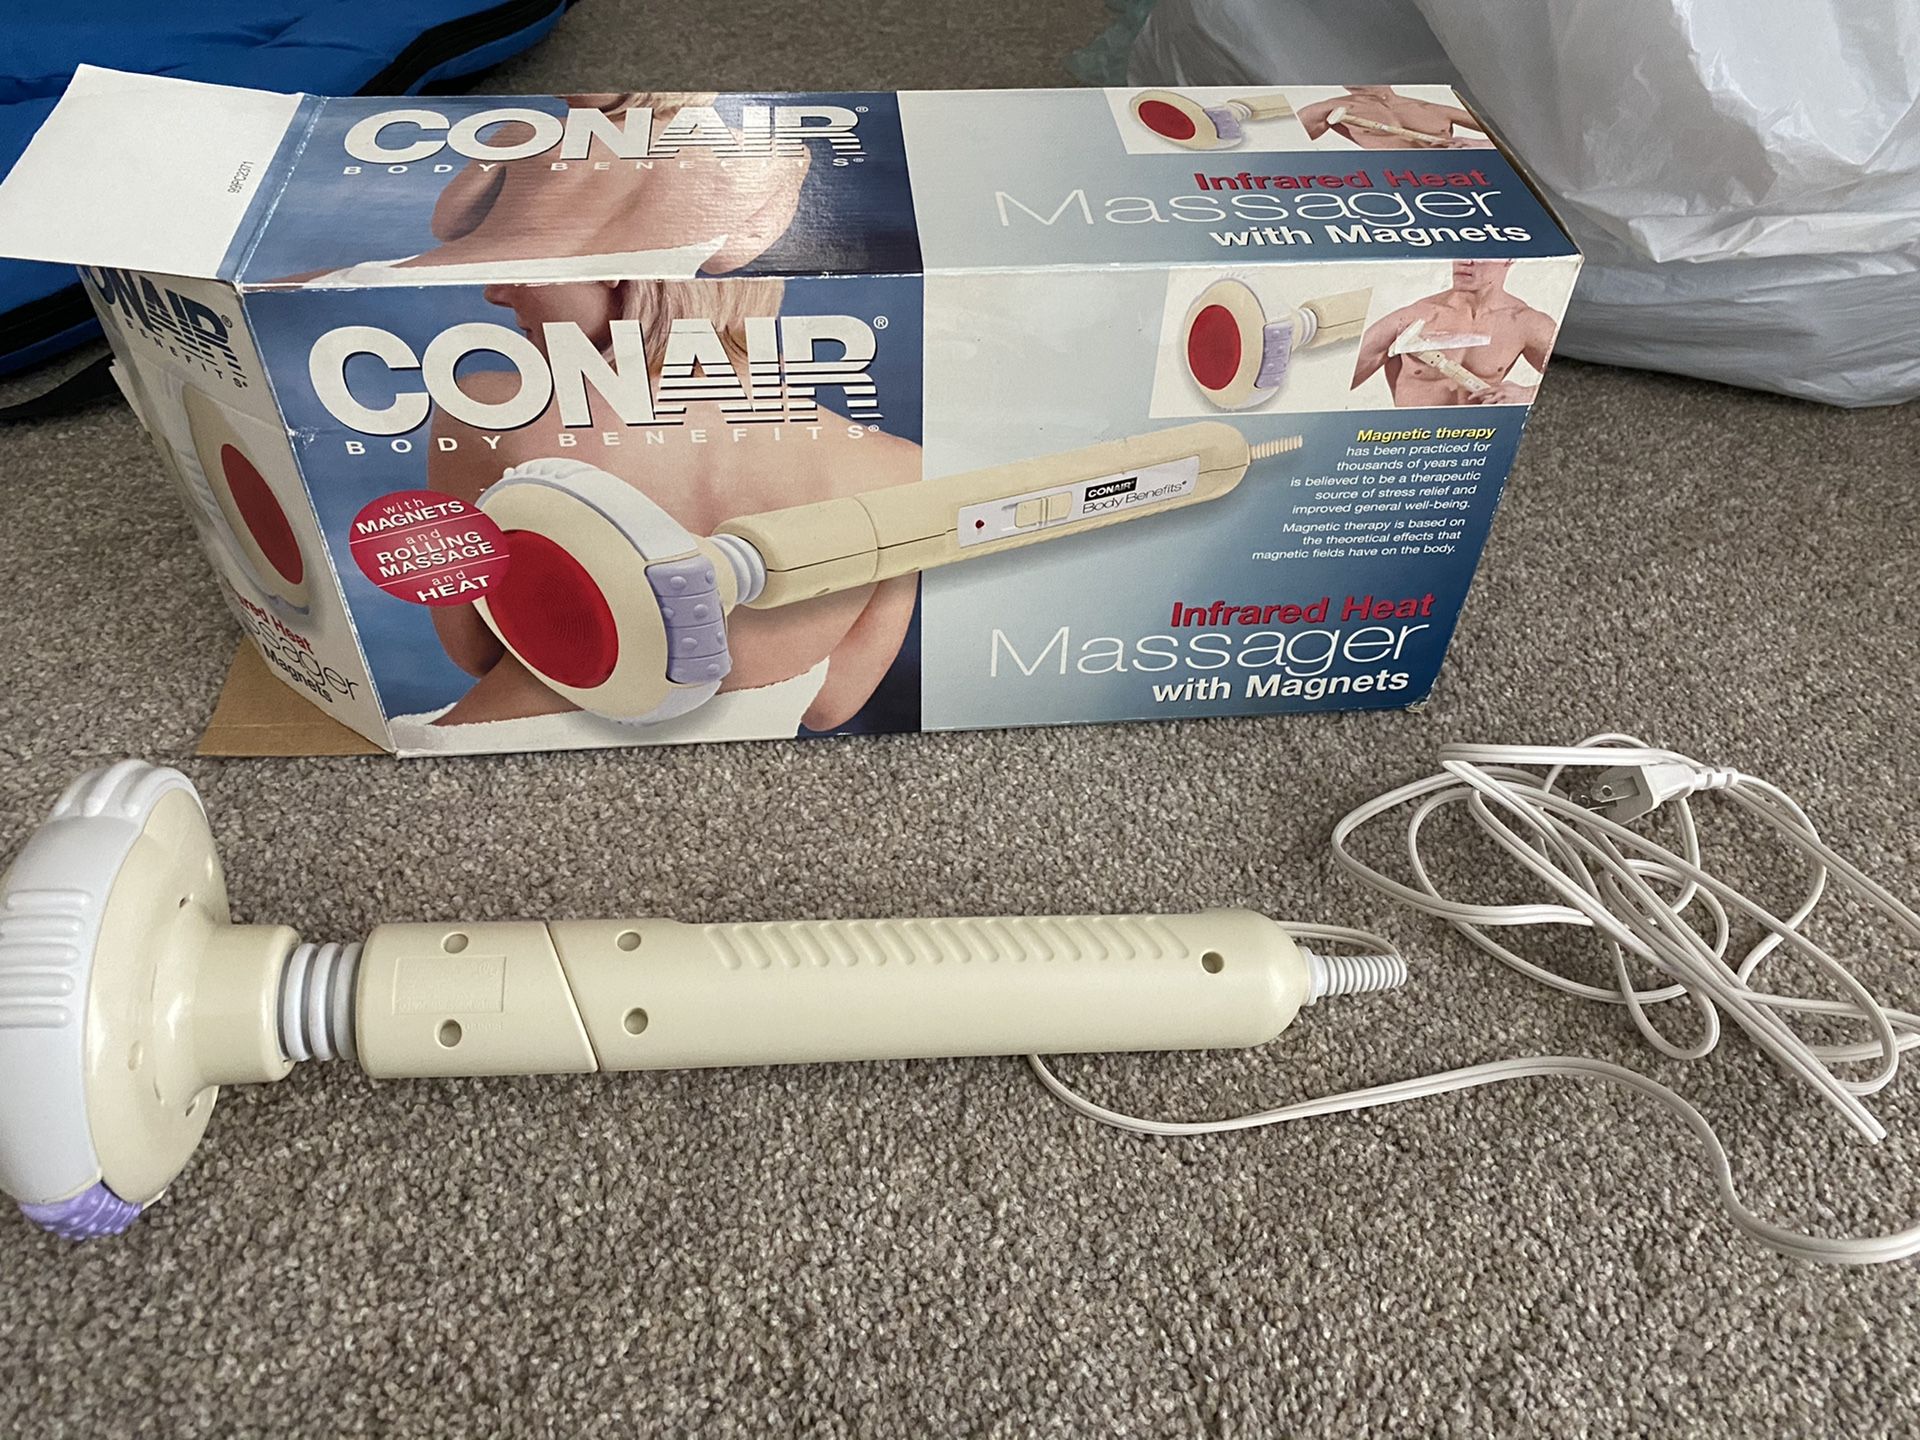 Conair Infrared Heat Massager With Magnets